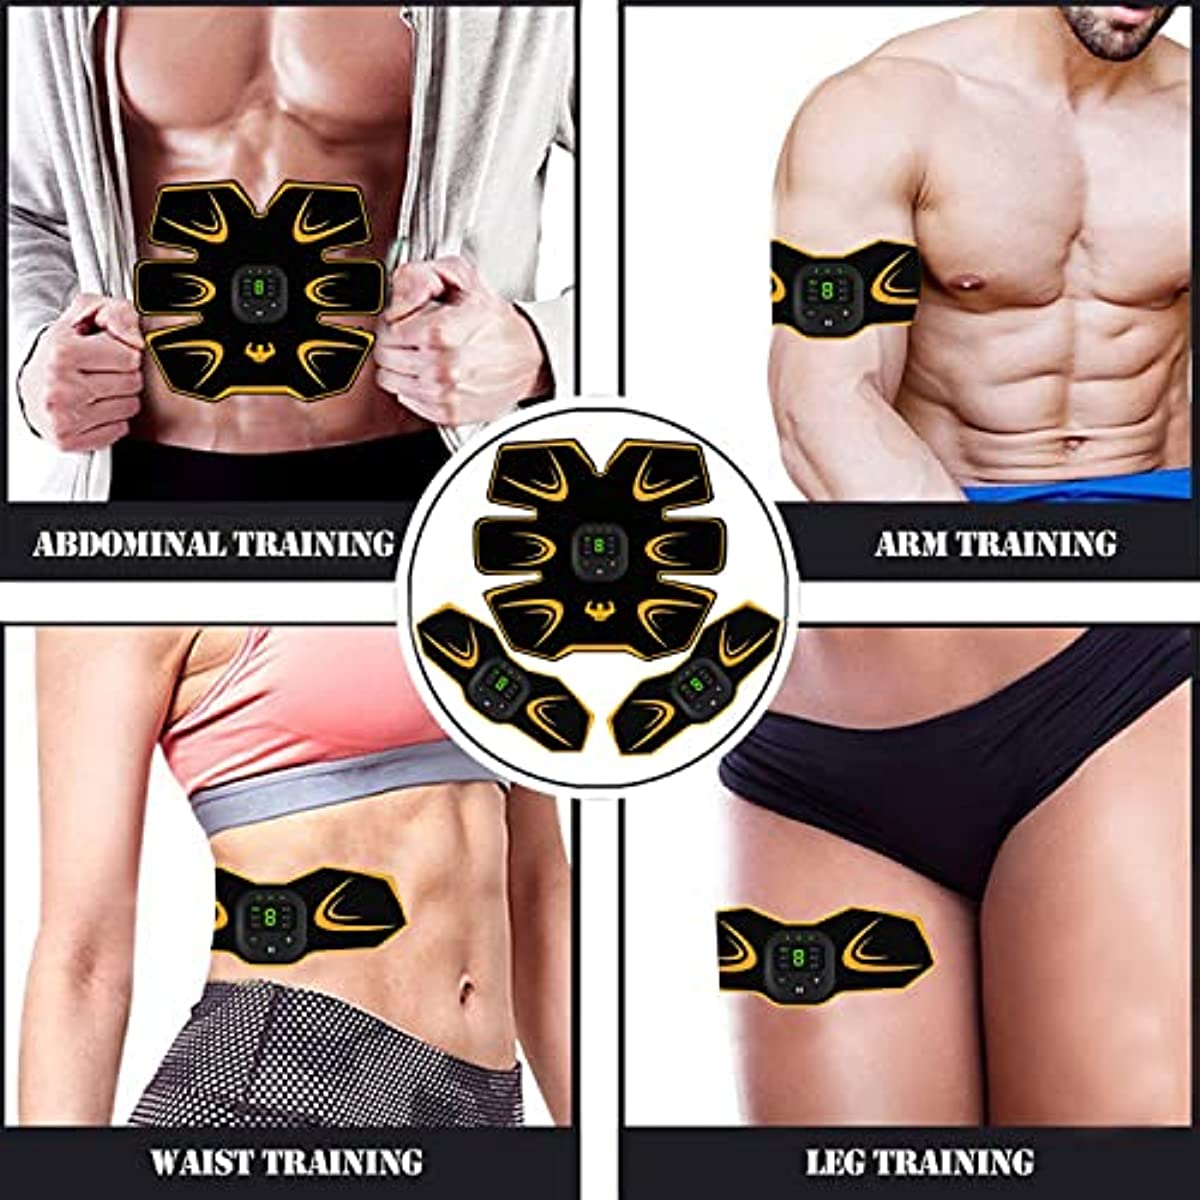 BLUE LOVE Abdominal Muscle Toner, Muscle Trainer,Portable Fitness Workout for Men Woman Abdomen/Arm/Leg Home Office Exercise Black